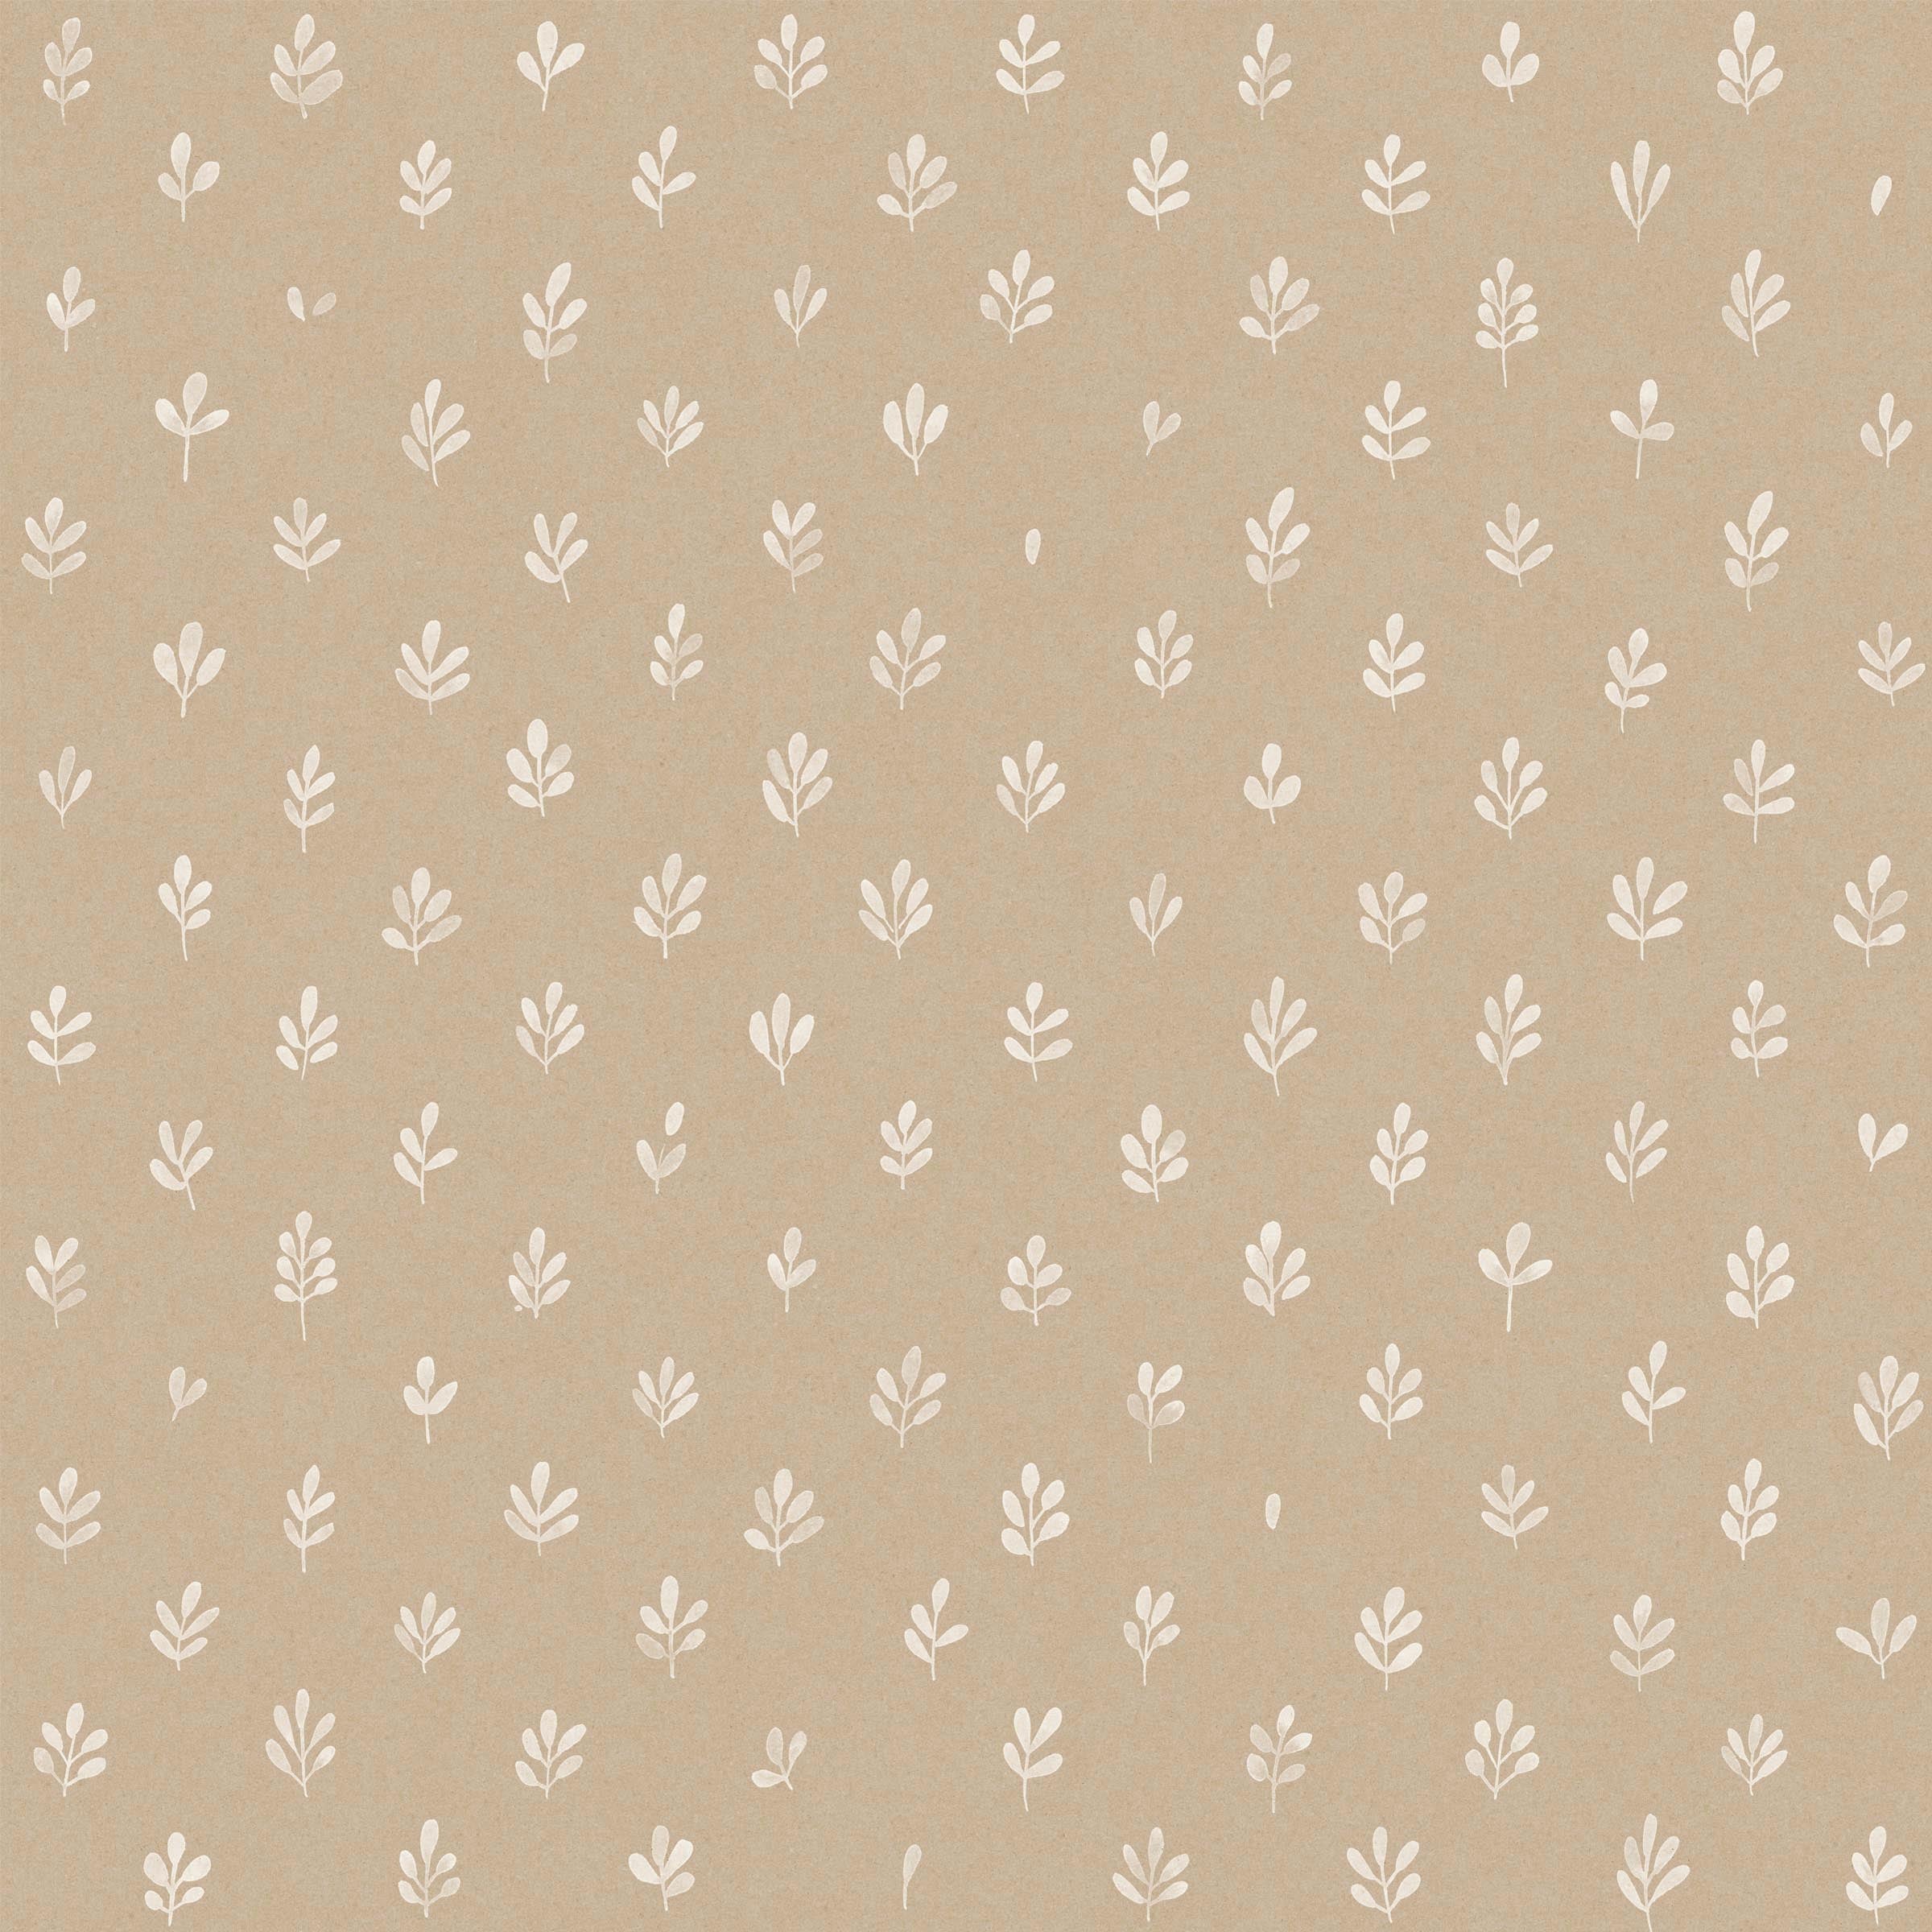 Detail of fabric in a repeating leaf print in cream on a tan field.